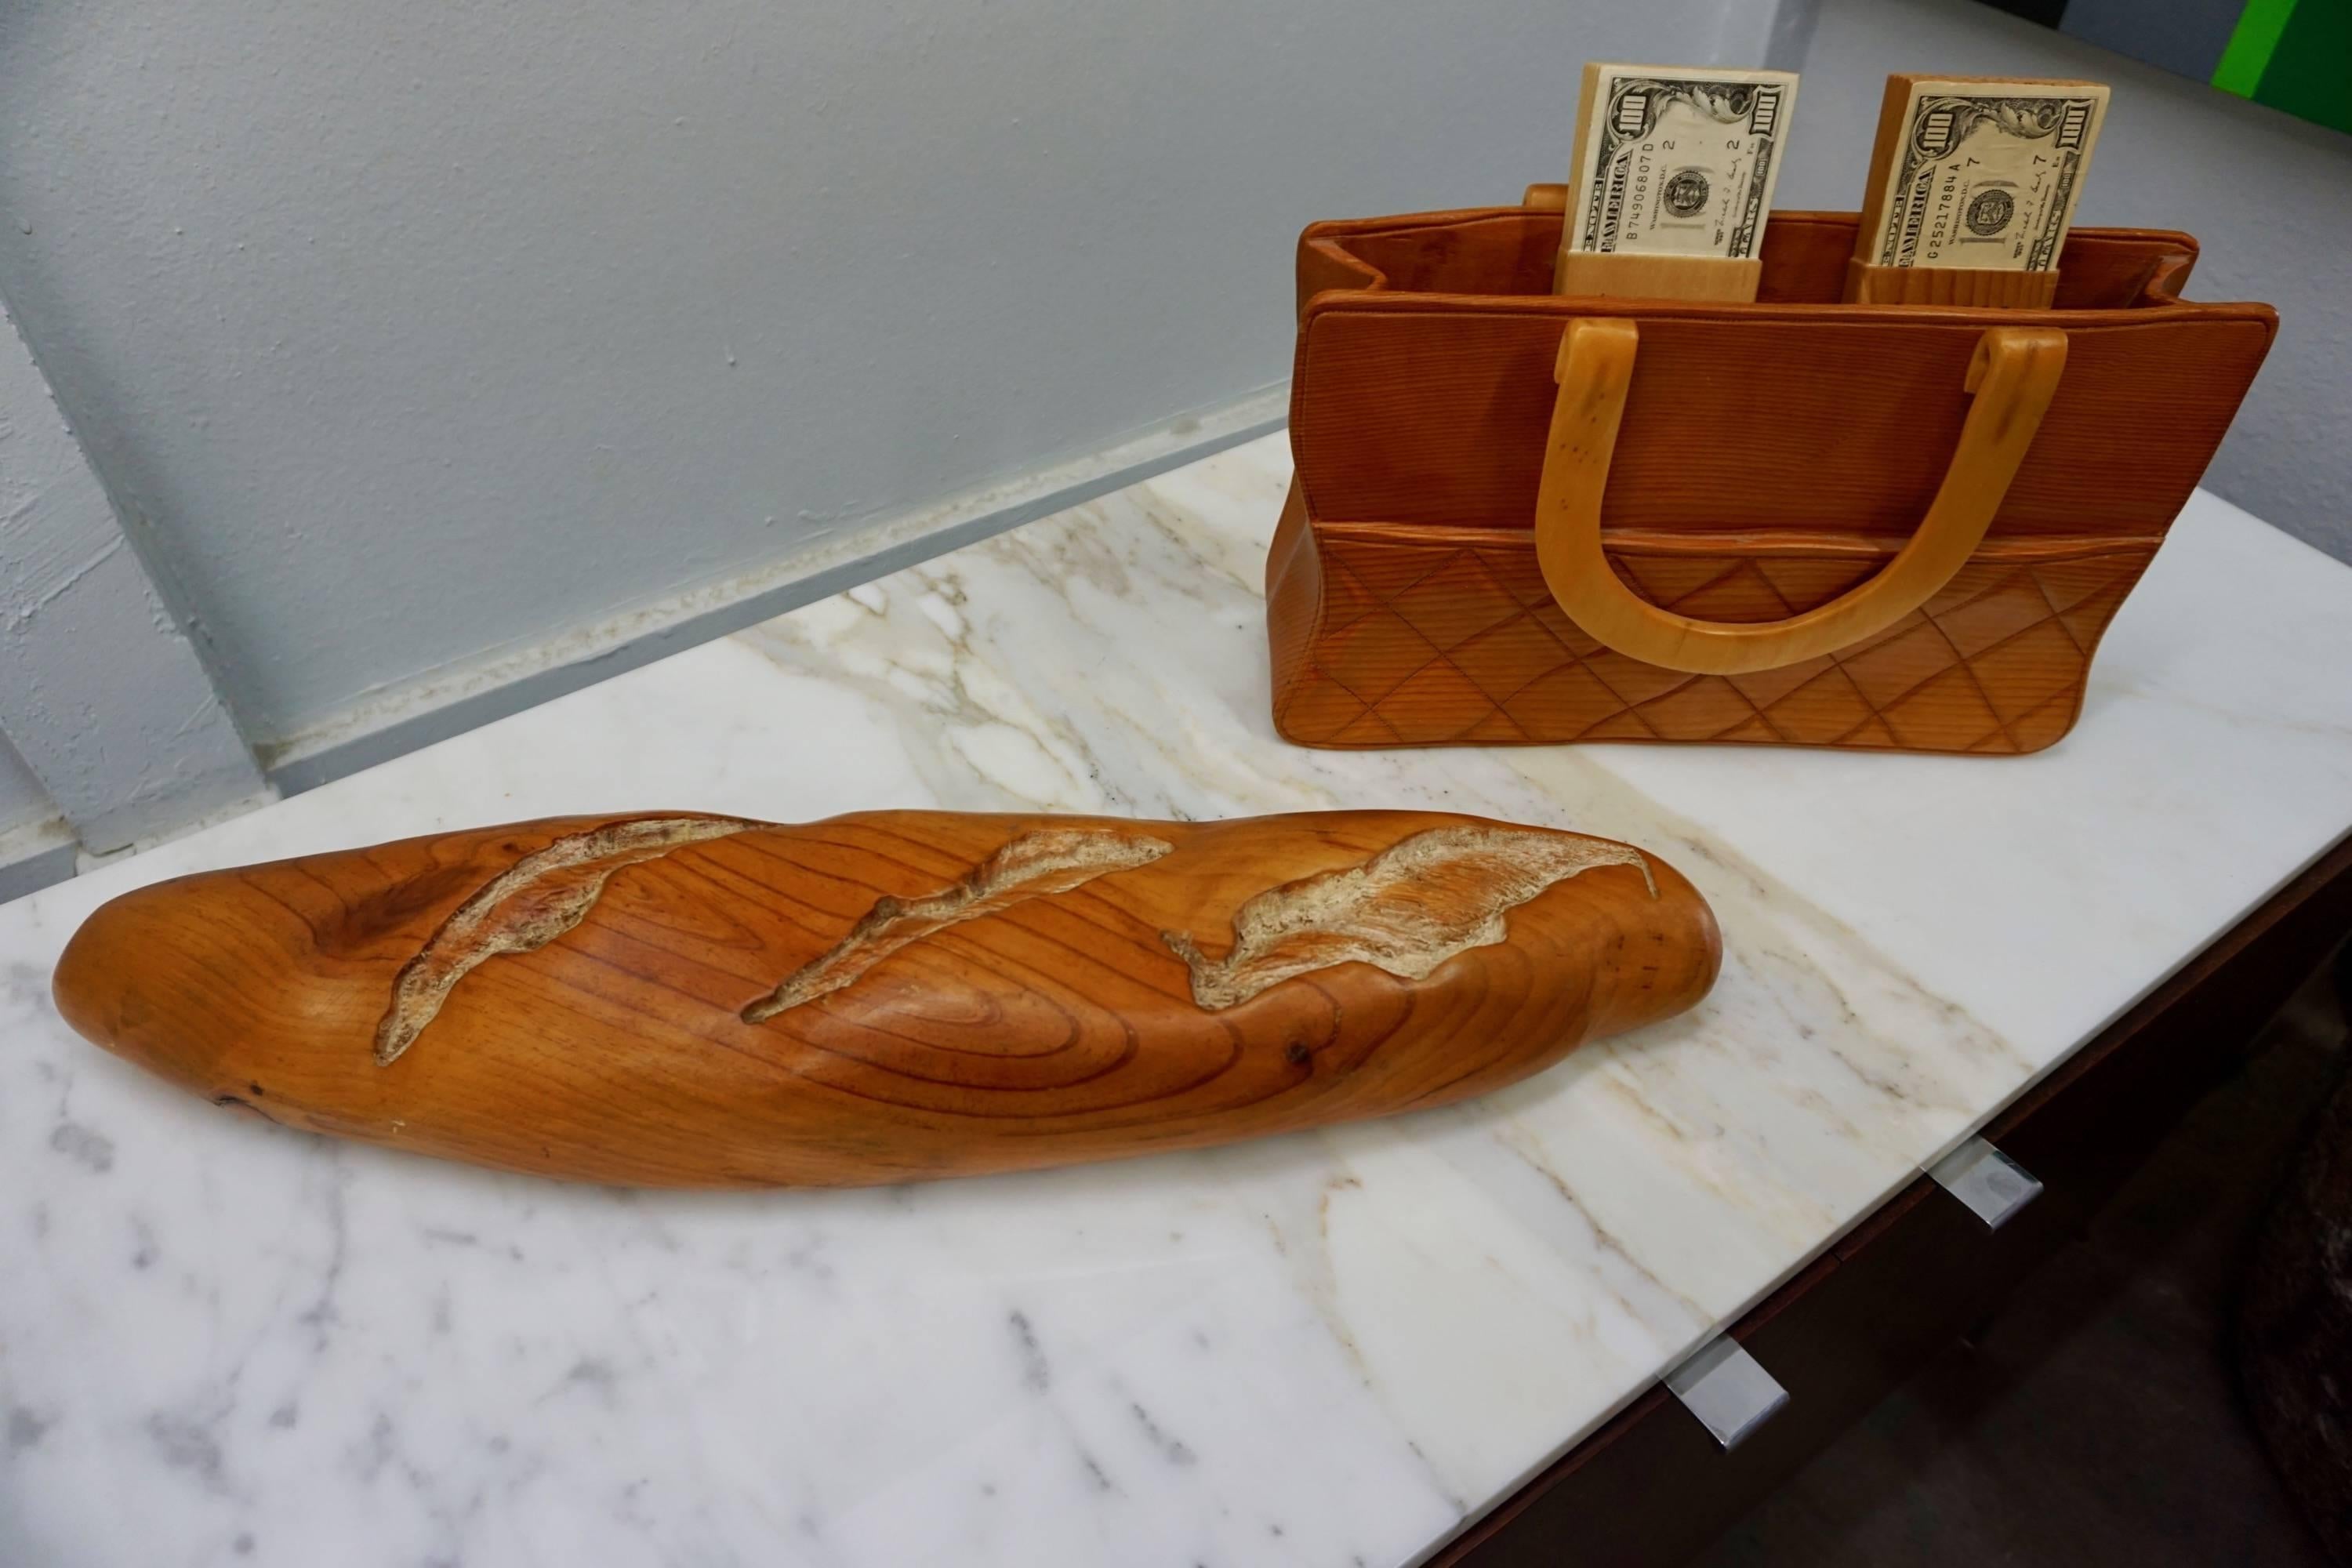 American Pop Art Loaf of Bread Sculpture by Rene Megroz For Sale